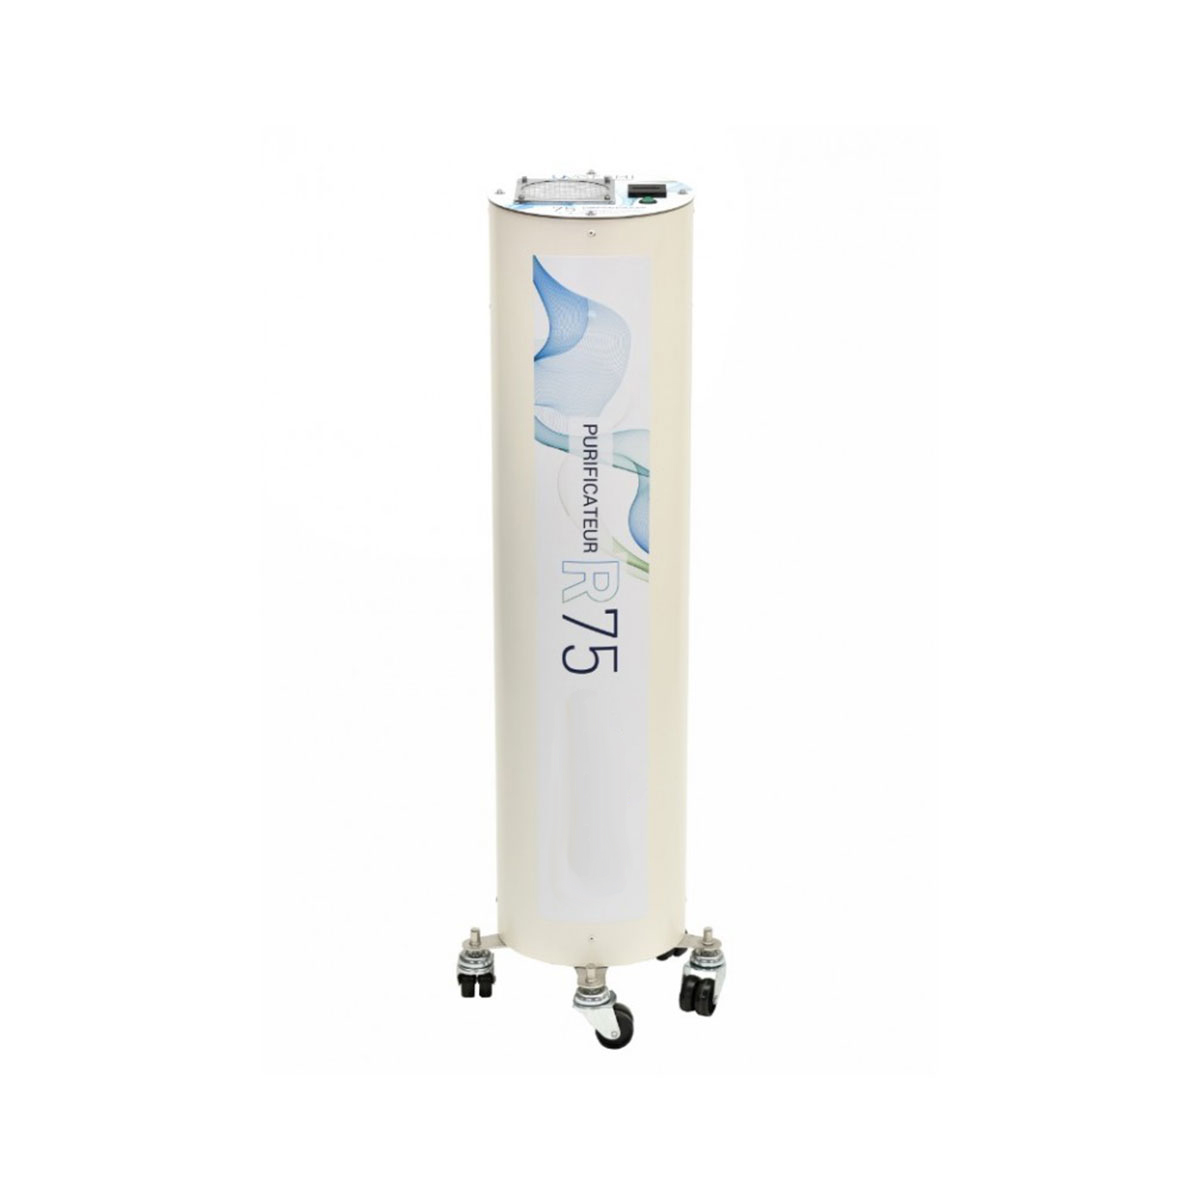 System for purifying air - R 75